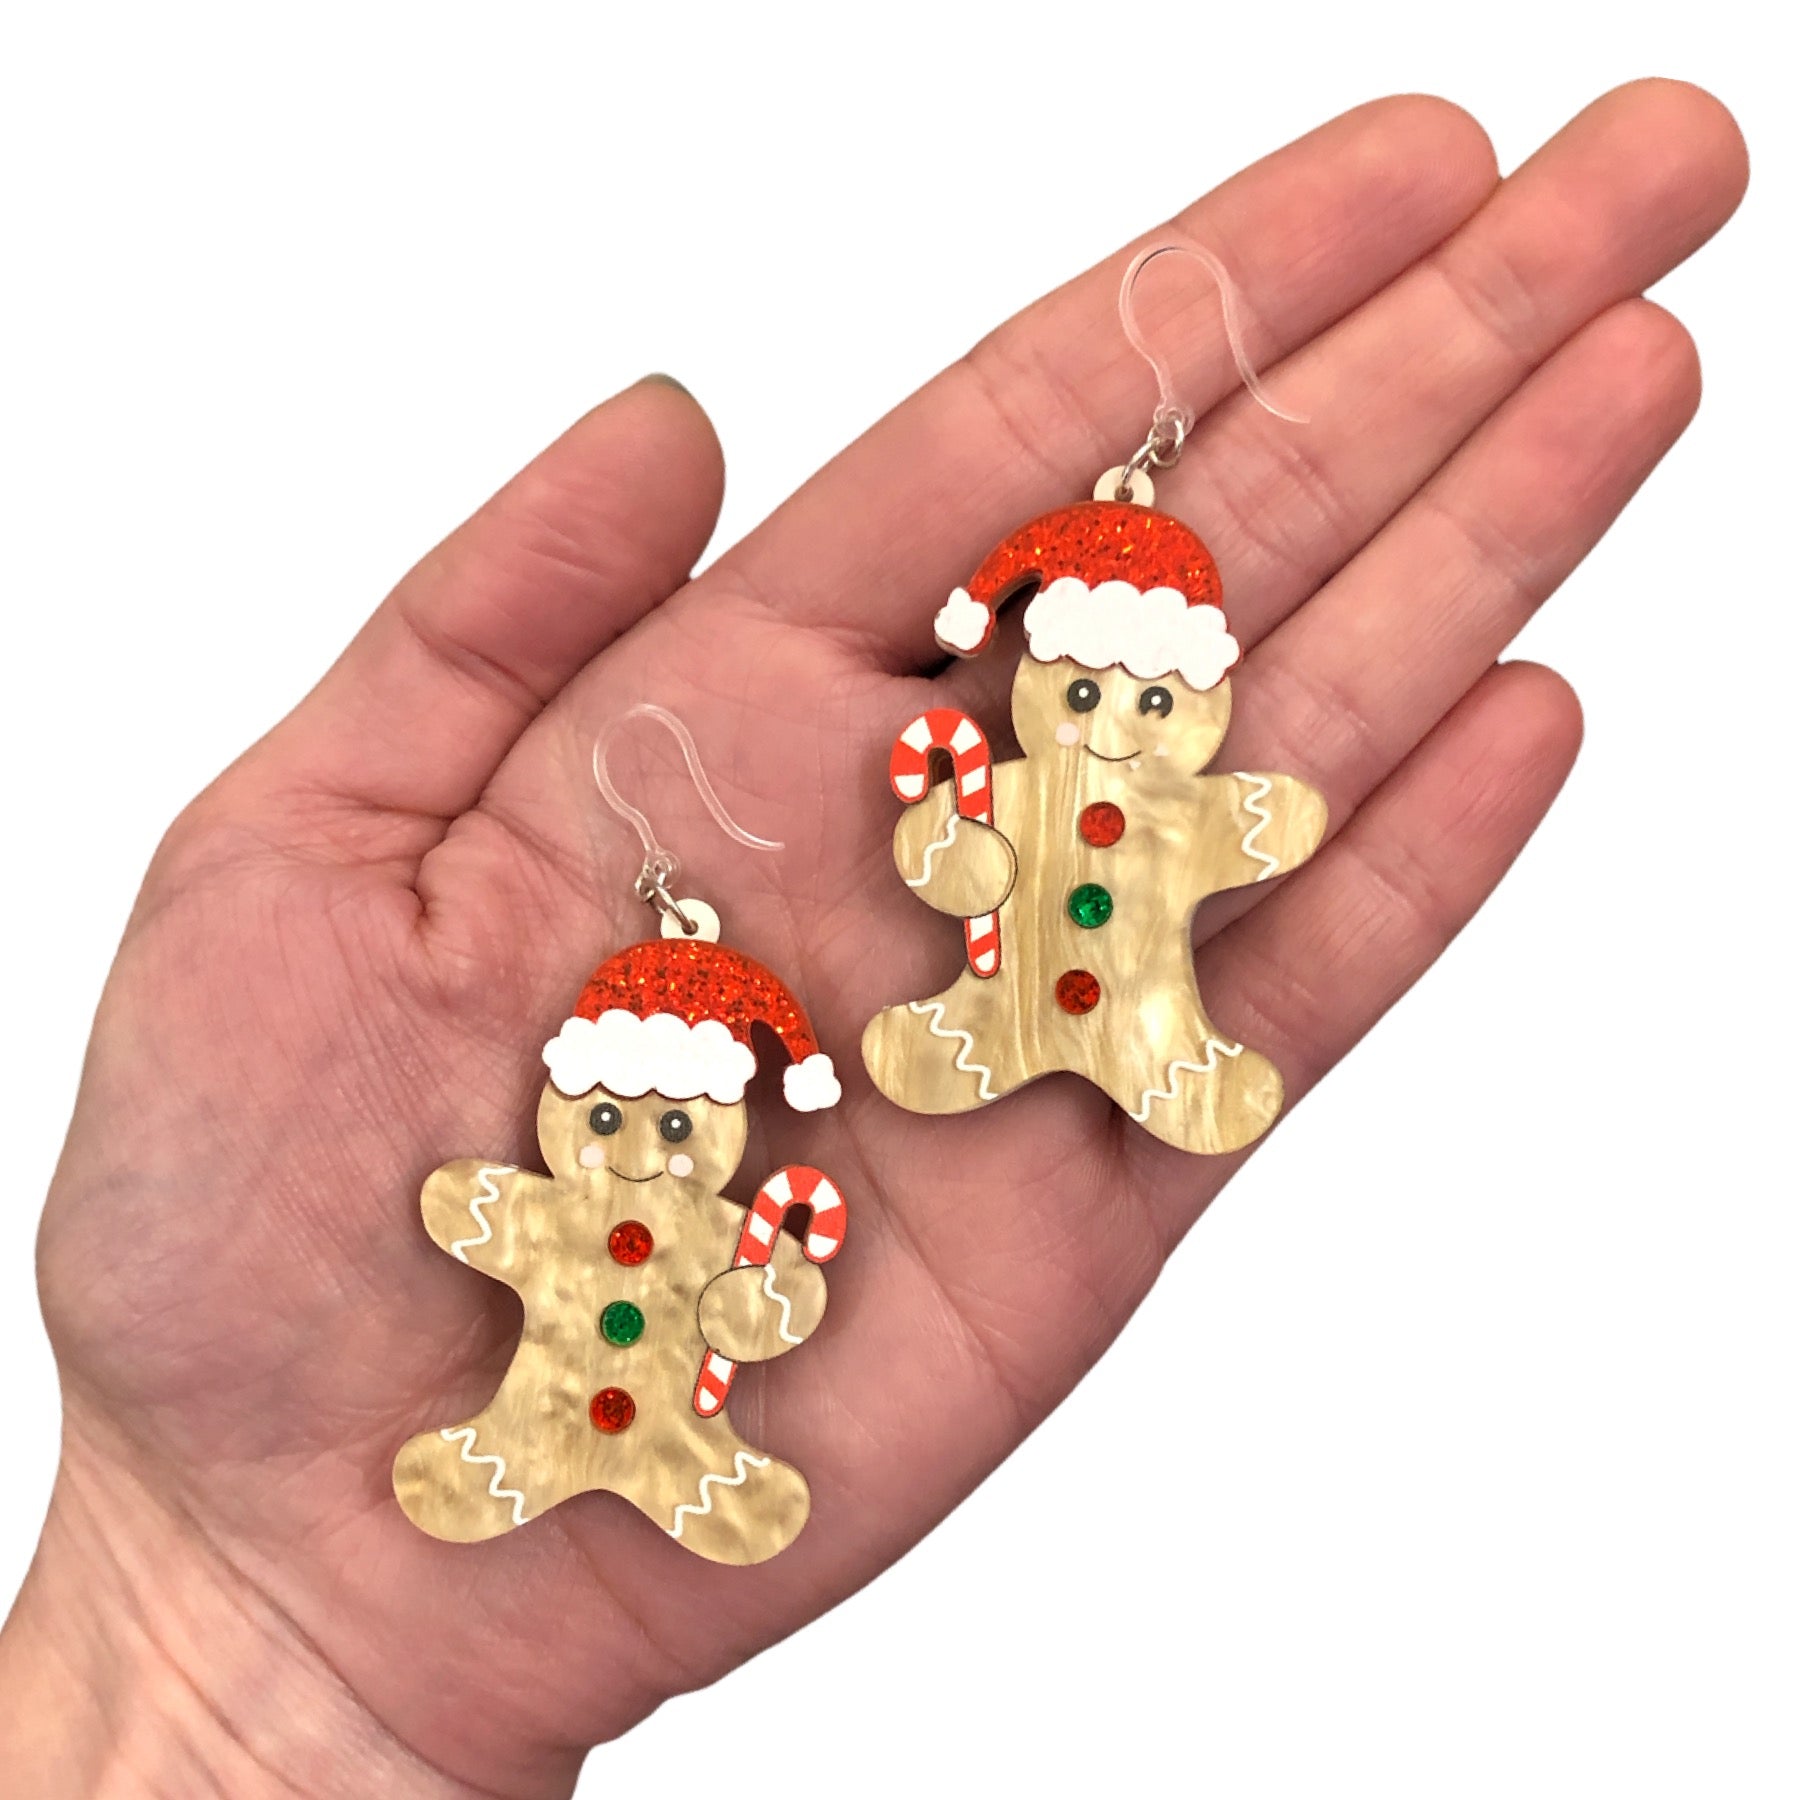 Exaggerated Gingerbread Man Earrings (Dangles) - size comparison hand